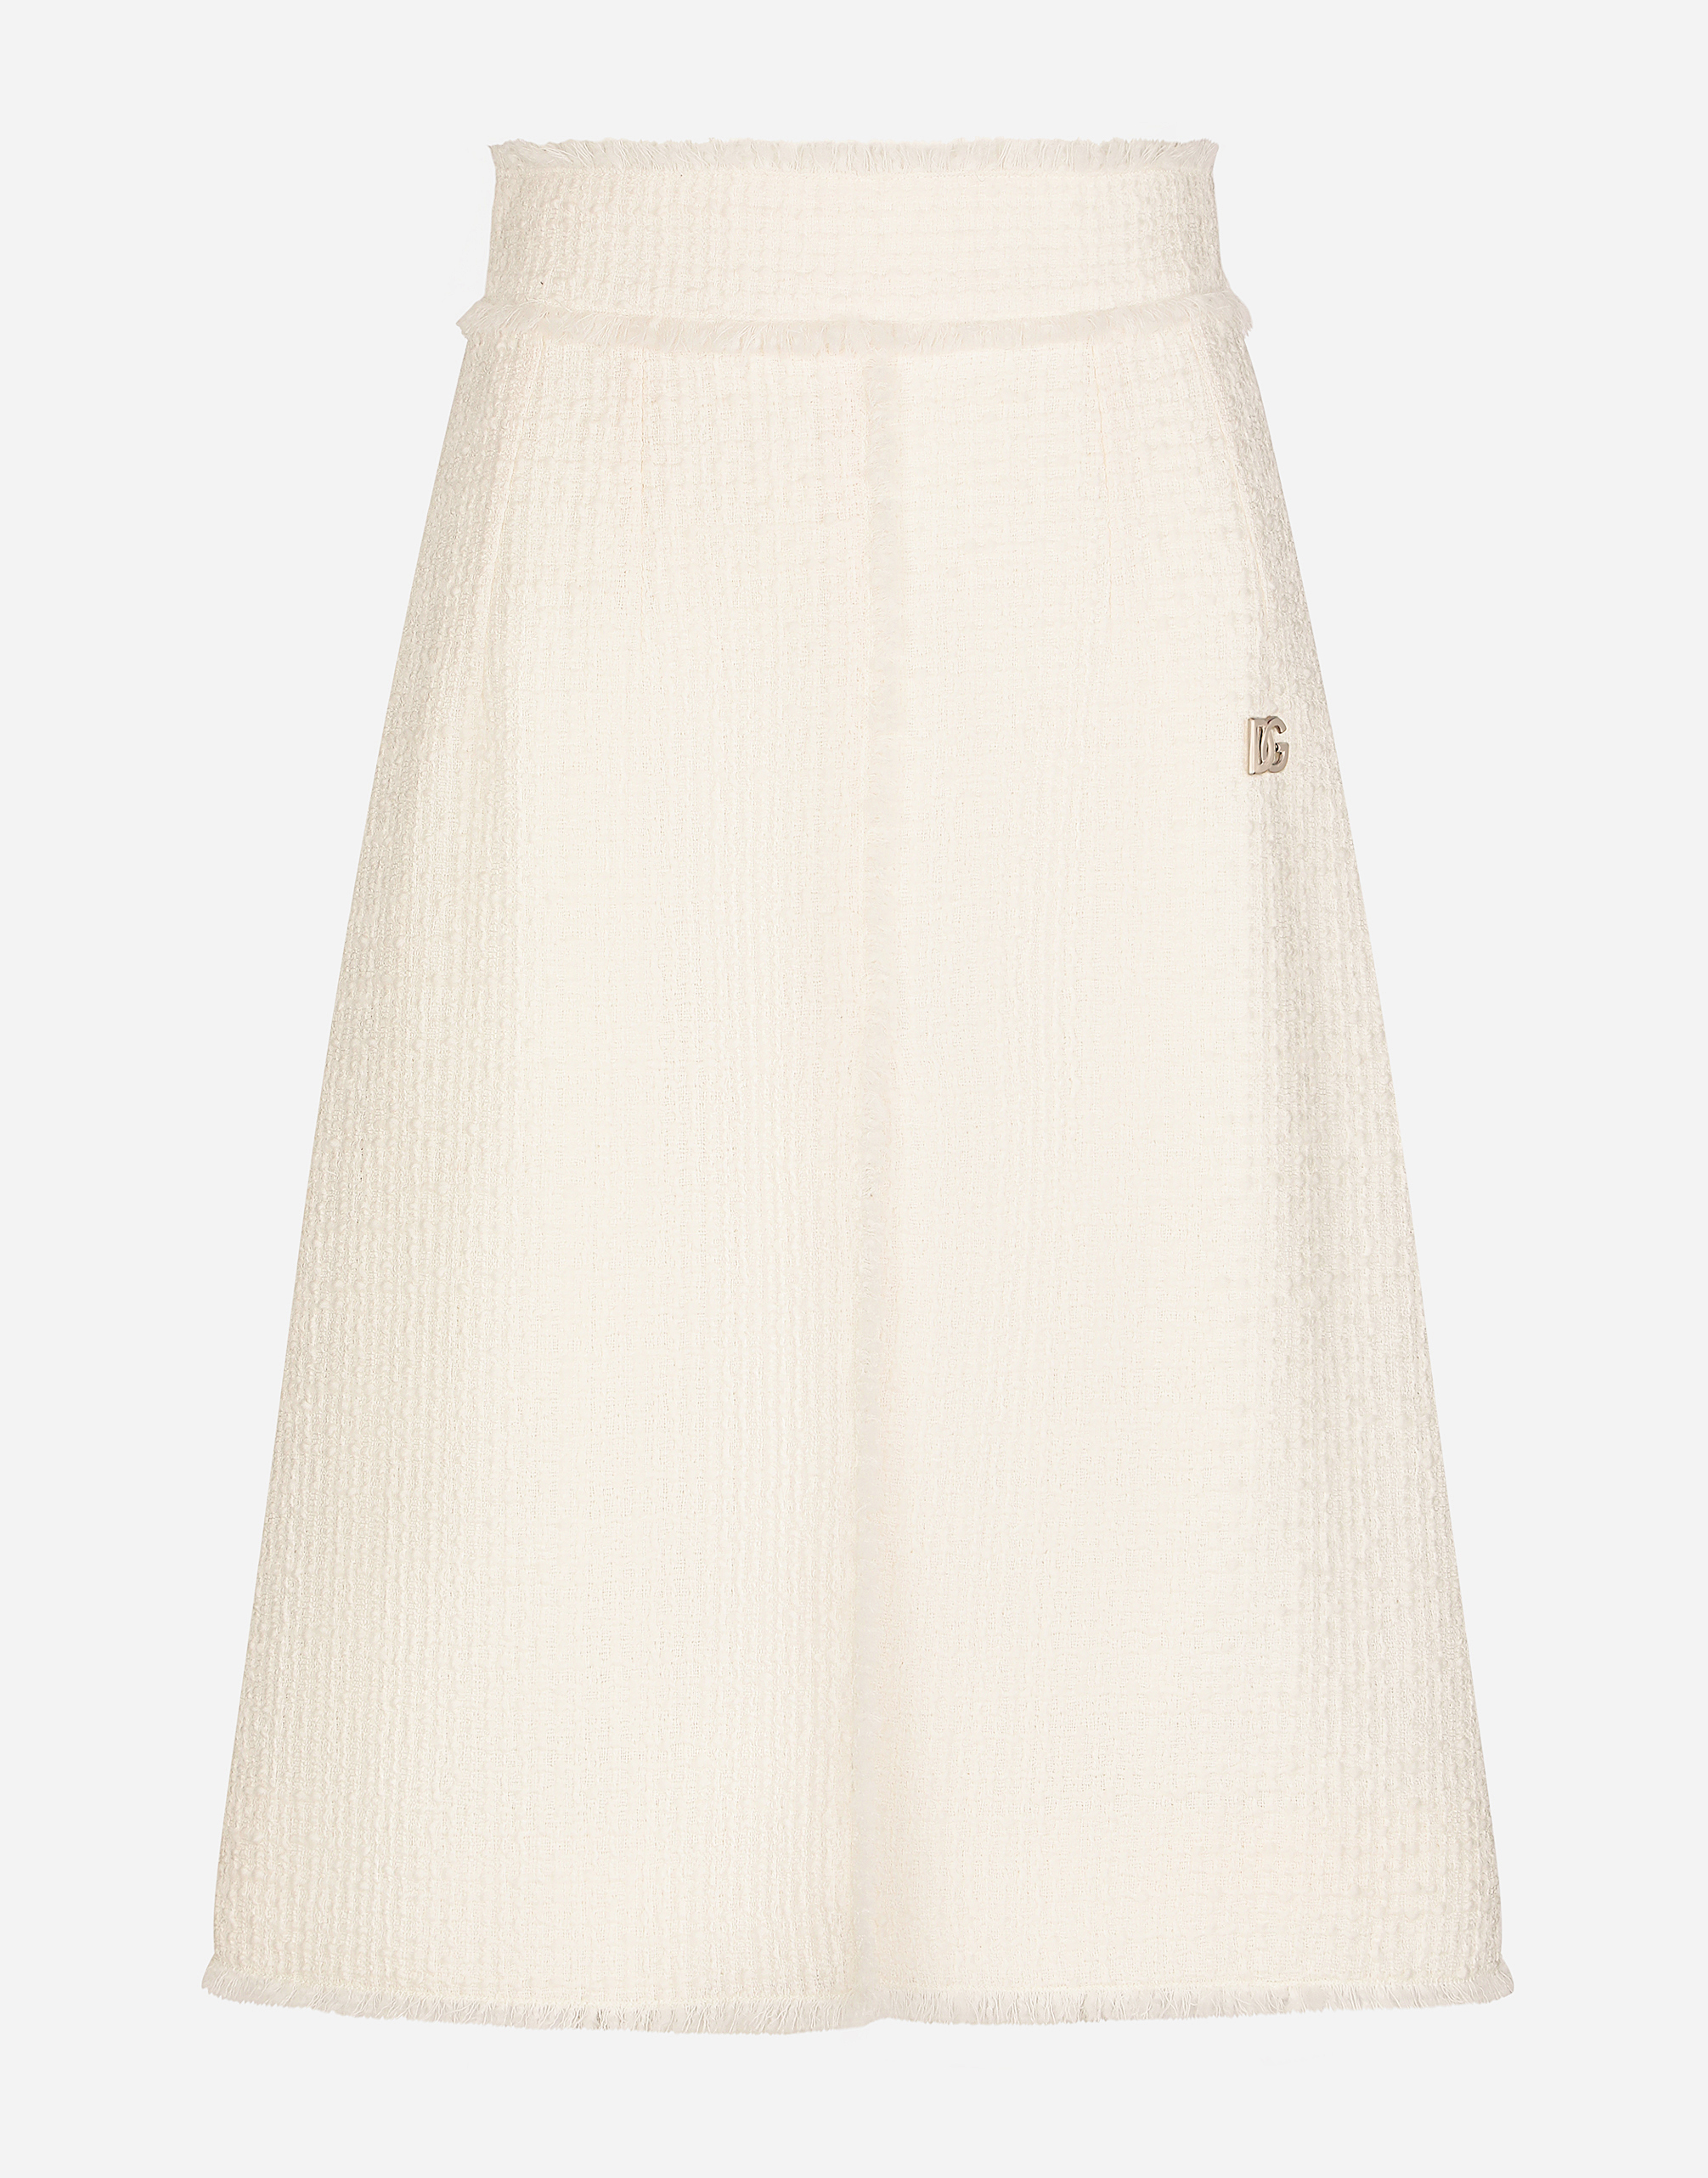 Raschel tweed midi skirt with central slit in White